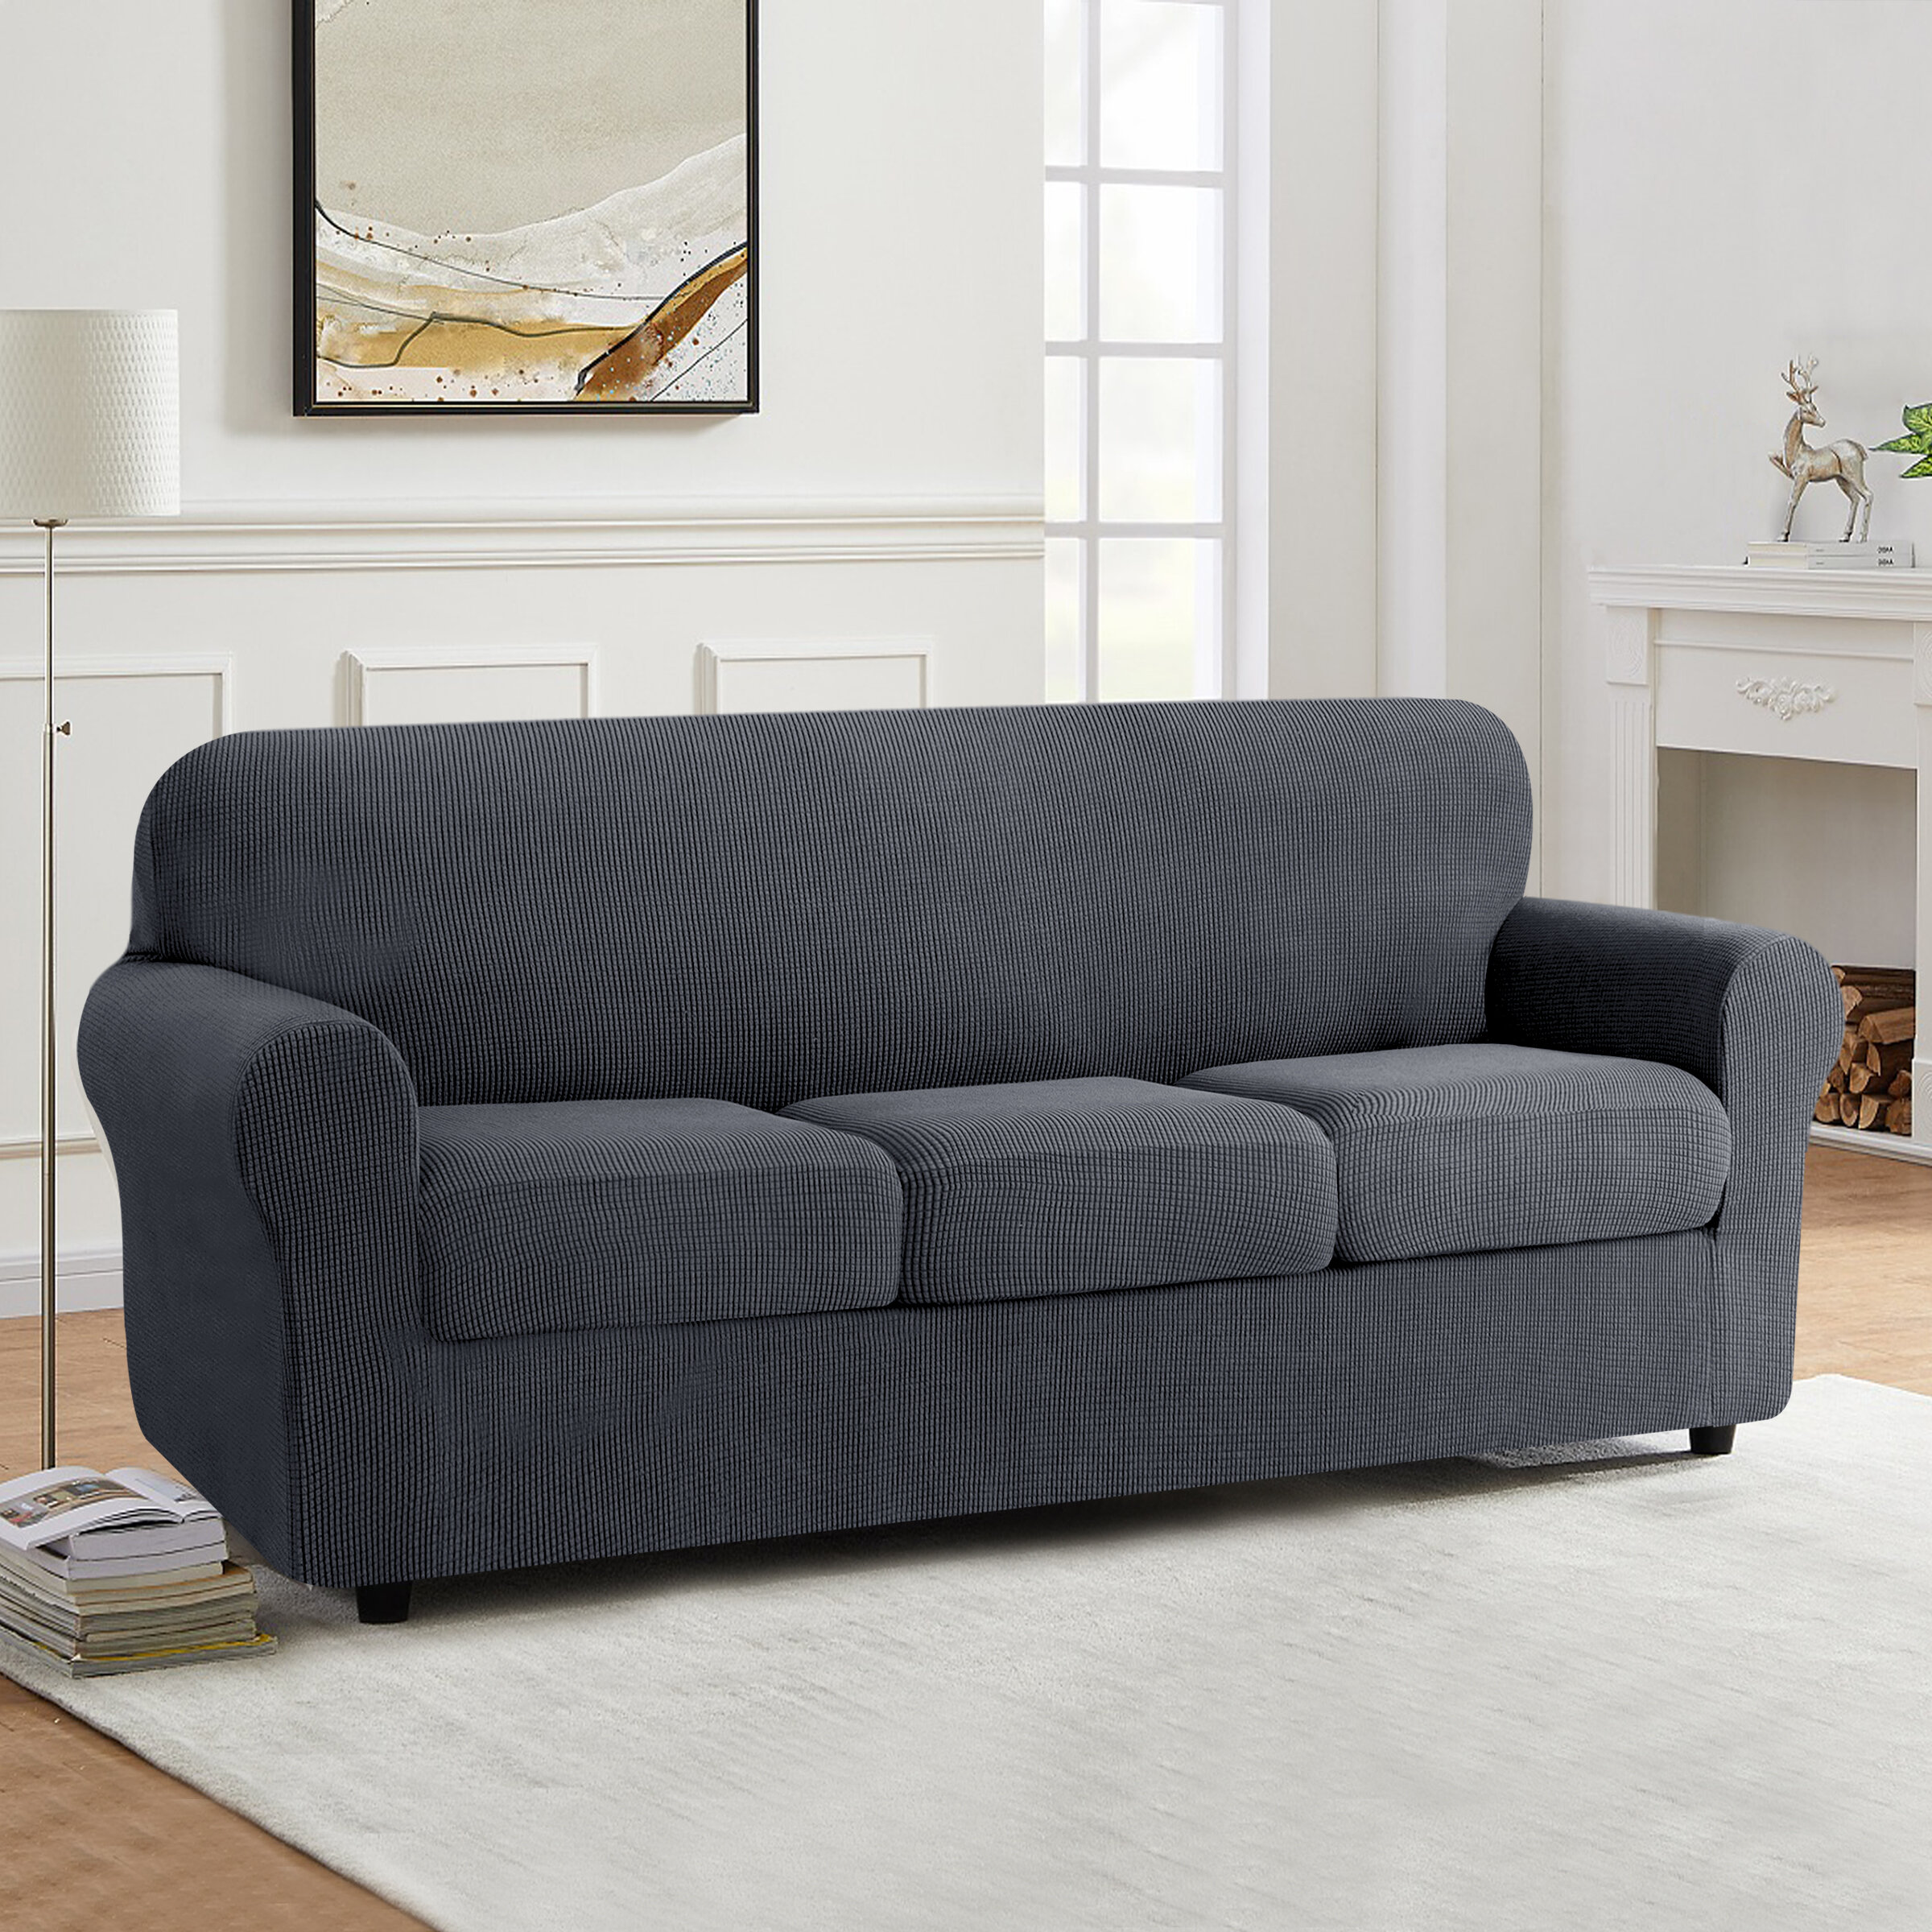 10 Reasons Your sectional sofa covers Is Not What It Should Be